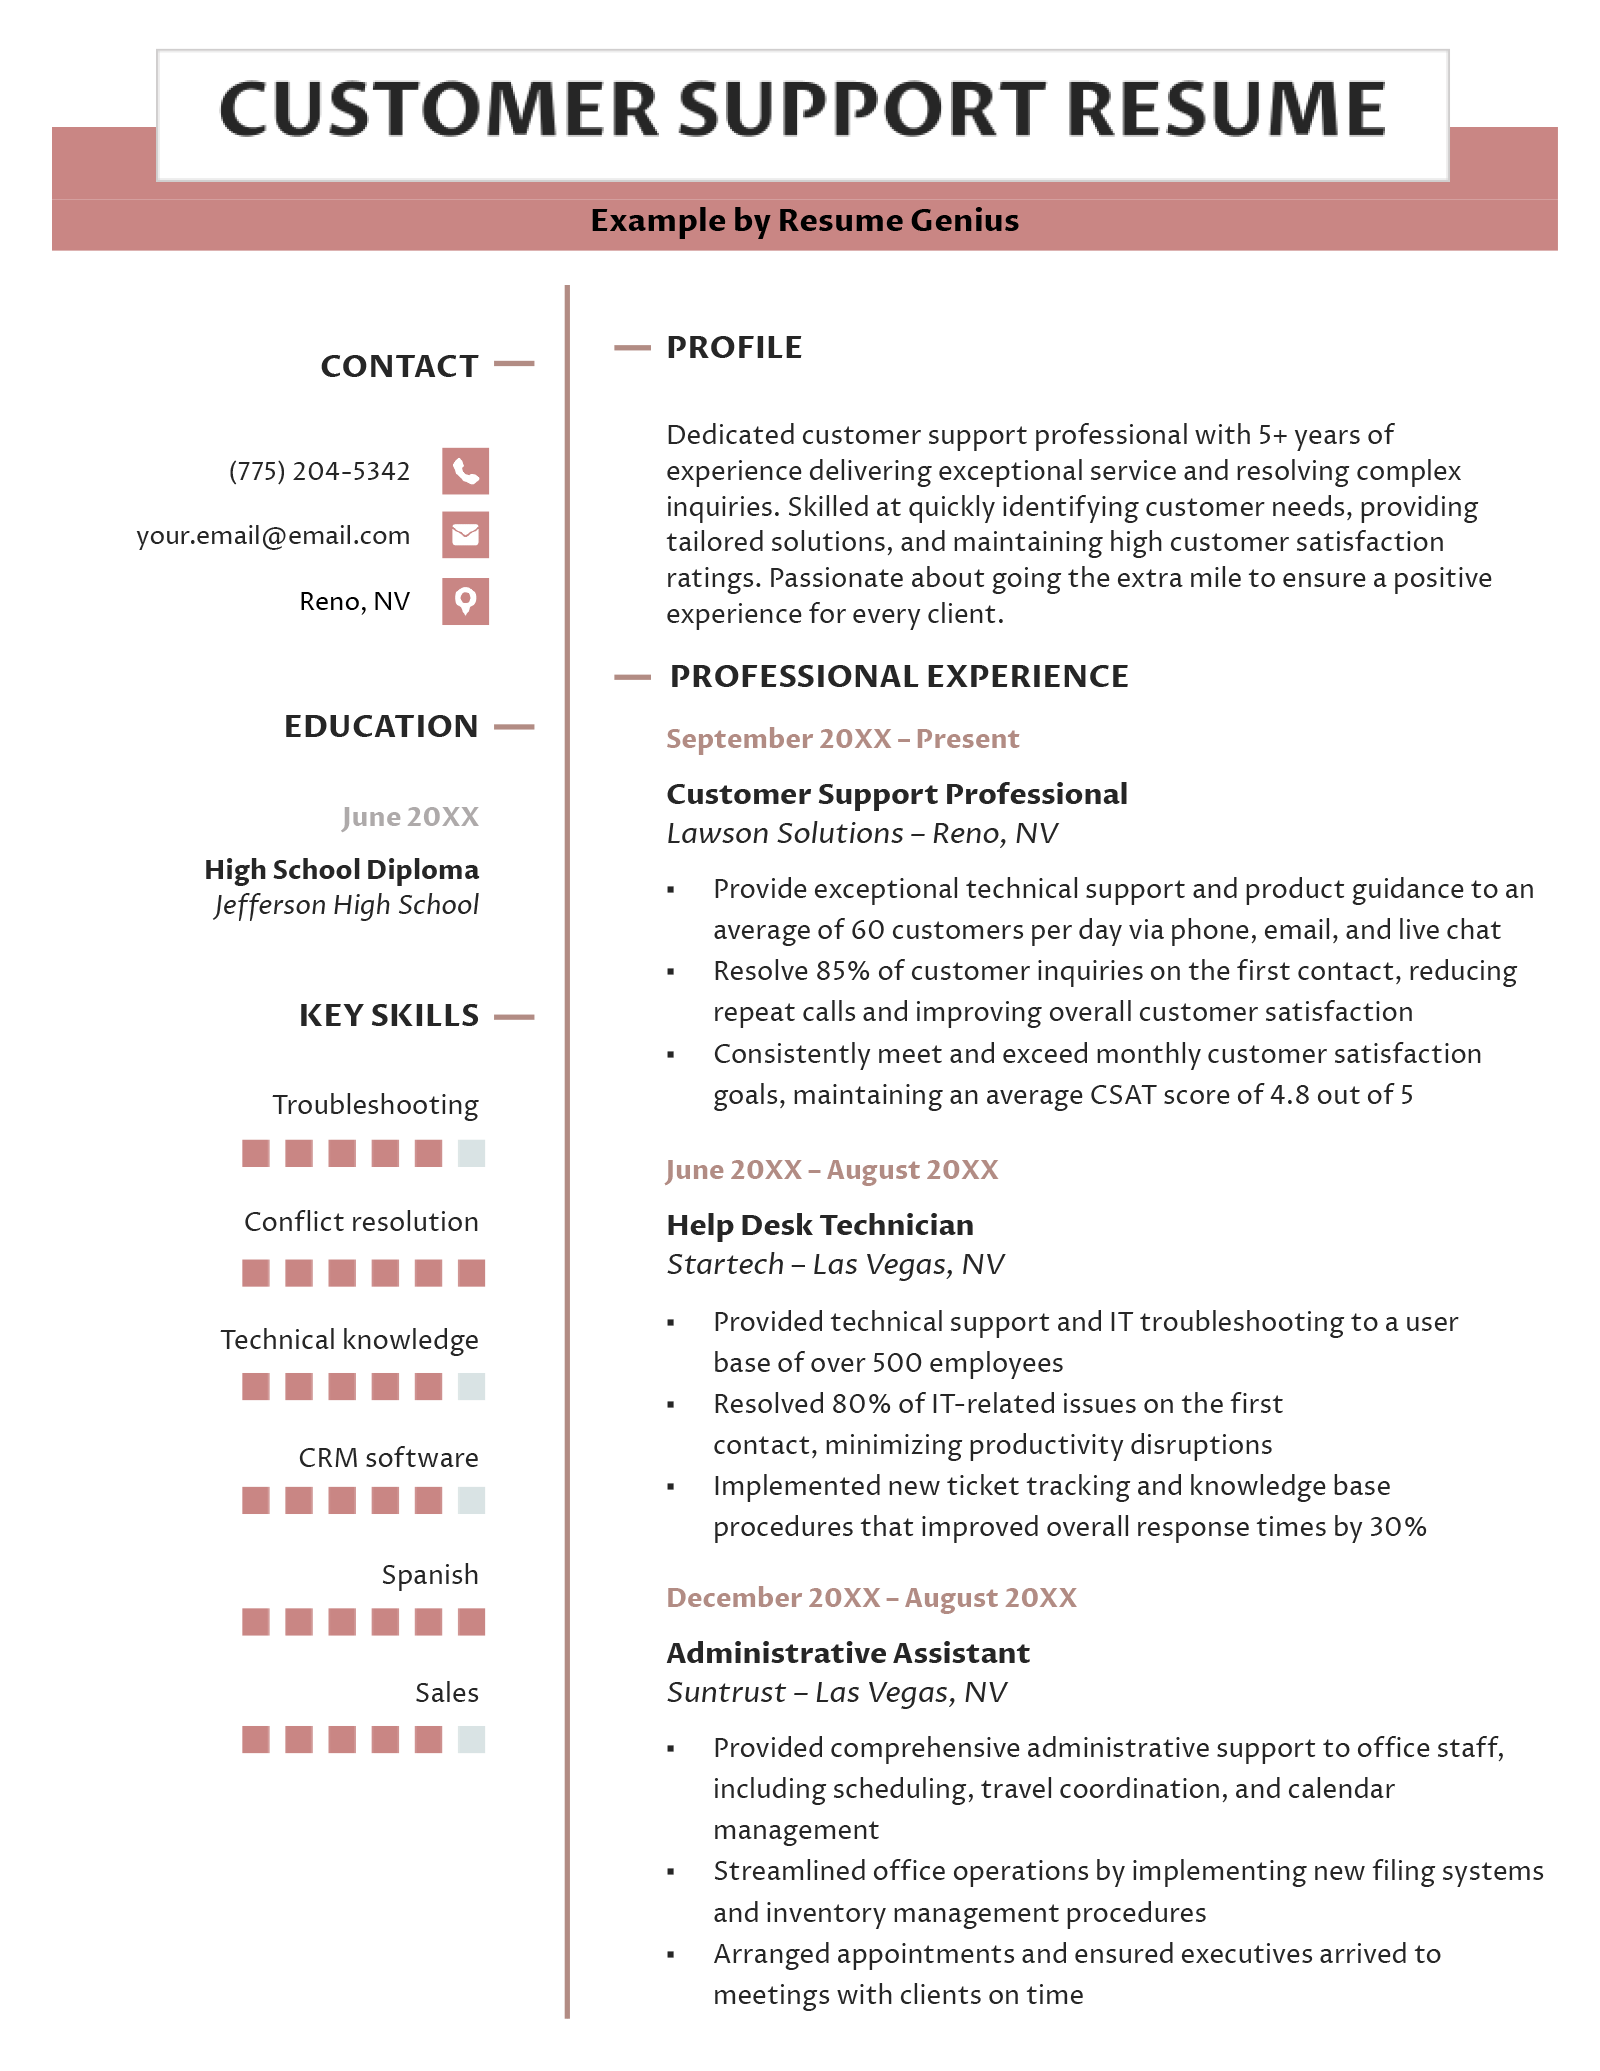 An example resume for a customer support professional.